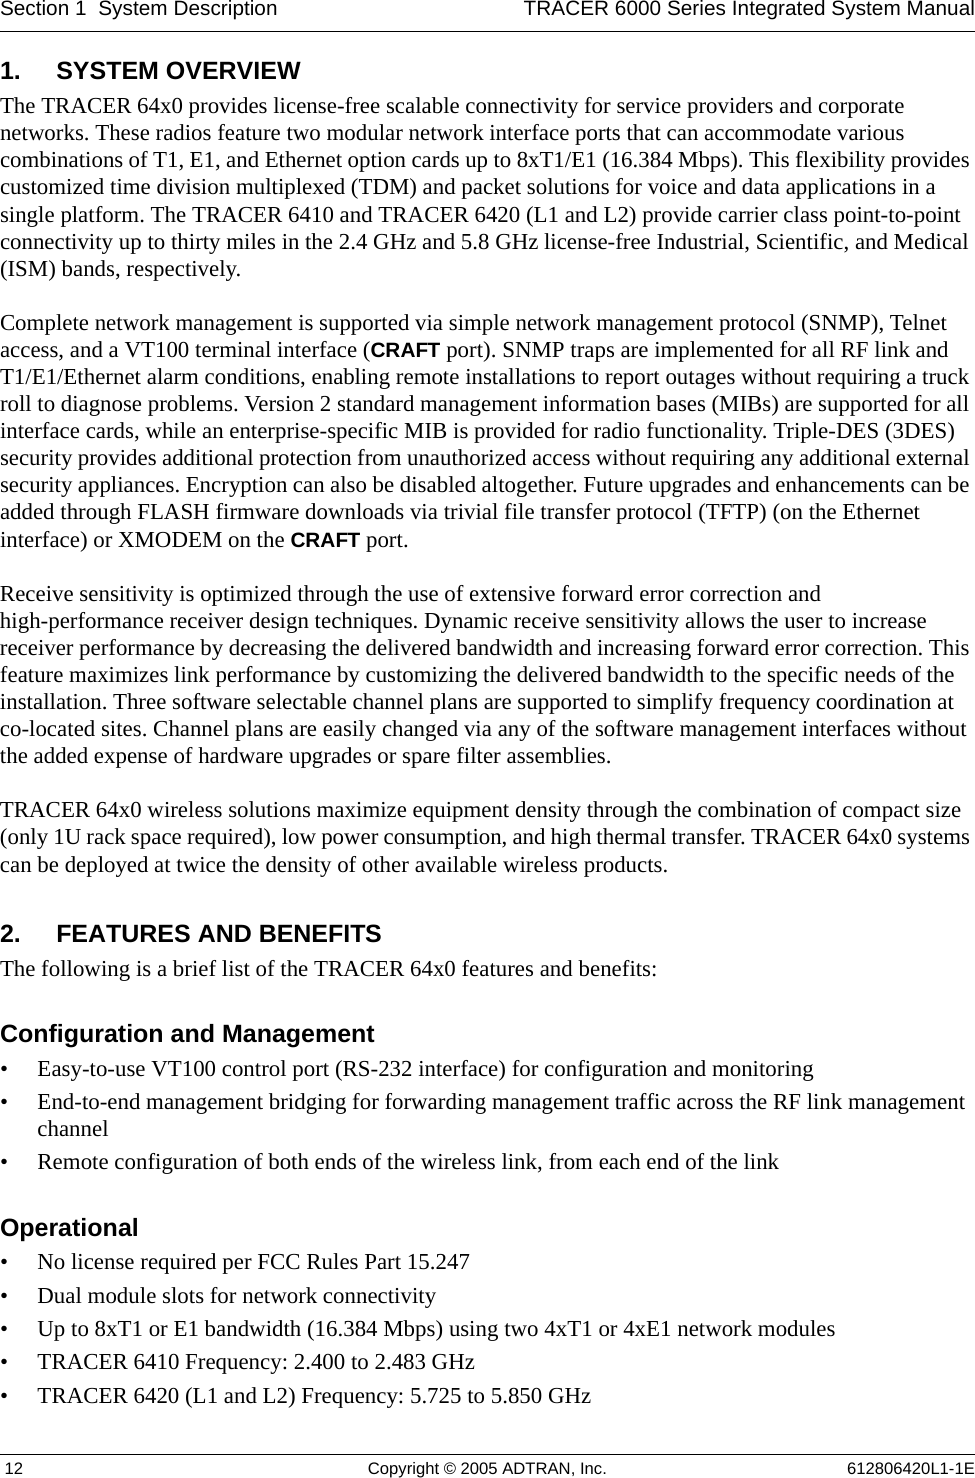 Section 1  System Description TRACER 6000 Series Integrated System Manual 12 Copyright © 2005 ADTRAN, Inc. 612806420L1-1E1. SYSTEM OVERVIEWThe TRACER 64x0 provides license-free scalable connectivity for service providers and corporate networks. These radios feature two modular network interface ports that can accommodate various combinations of T1, E1, and Ethernet option cards up to 8xT1/E1 (16.384 Mbps). This flexibility provides customized time division multiplexed (TDM) and packet solutions for voice and data applications in a single platform. The TRACER 6410 and TRACER 6420 (L1 and L2) provide carrier class point-to-point connectivity up to thirty miles in the 2.4 GHz and 5.8 GHz license-free Industrial, Scientific, and Medical (ISM) bands, respectively.Complete network management is supported via simple network management protocol (SNMP), Telnet access, and a VT100 terminal interface (CRAFT port). SNMP traps are implemented for all RF link and T1/E1/Ethernet alarm conditions, enabling remote installations to report outages without requiring a truck roll to diagnose problems. Version 2 standard management information bases (MIBs) are supported for all interface cards, while an enterprise-specific MIB is provided for radio functionality. Triple-DES (3DES) security provides additional protection from unauthorized access without requiring any additional external security appliances. Encryption can also be disabled altogether. Future upgrades and enhancements can be added through FLASH firmware downloads via trivial file transfer protocol (TFTP) (on the Ethernet interface) or XMODEM on the CRAFT port.Receive sensitivity is optimized through the use of extensive forward error correction and high-performance receiver design techniques. Dynamic receive sensitivity allows the user to increase receiver performance by decreasing the delivered bandwidth and increasing forward error correction. This feature maximizes link performance by customizing the delivered bandwidth to the specific needs of the installation. Three software selectable channel plans are supported to simplify frequency coordination at co-located sites. Channel plans are easily changed via any of the software management interfaces without the added expense of hardware upgrades or spare filter assemblies.TRACER 64x0 wireless solutions maximize equipment density through the combination of compact size (only 1U rack space required), low power consumption, and high thermal transfer. TRACER 64x0 systems can be deployed at twice the density of other available wireless products.2. FEATURES AND BENEFITSThe following is a brief list of the TRACER 64x0 features and benefits:Configuration and Management• Easy-to-use VT100 control port (RS-232 interface) for configuration and monitoring• End-to-end management bridging for forwarding management traffic across the RF link management channel• Remote configuration of both ends of the wireless link, from each end of the linkOperational• No license required per FCC Rules Part 15.247• Dual module slots for network connectivity• Up to 8xT1 or E1 bandwidth (16.384 Mbps) using two 4xT1 or 4xE1 network modules• TRACER 6410 Frequency: 2.400 to 2.483 GHz• TRACER 6420 (L1 and L2) Frequency: 5.725 to 5.850 GHz